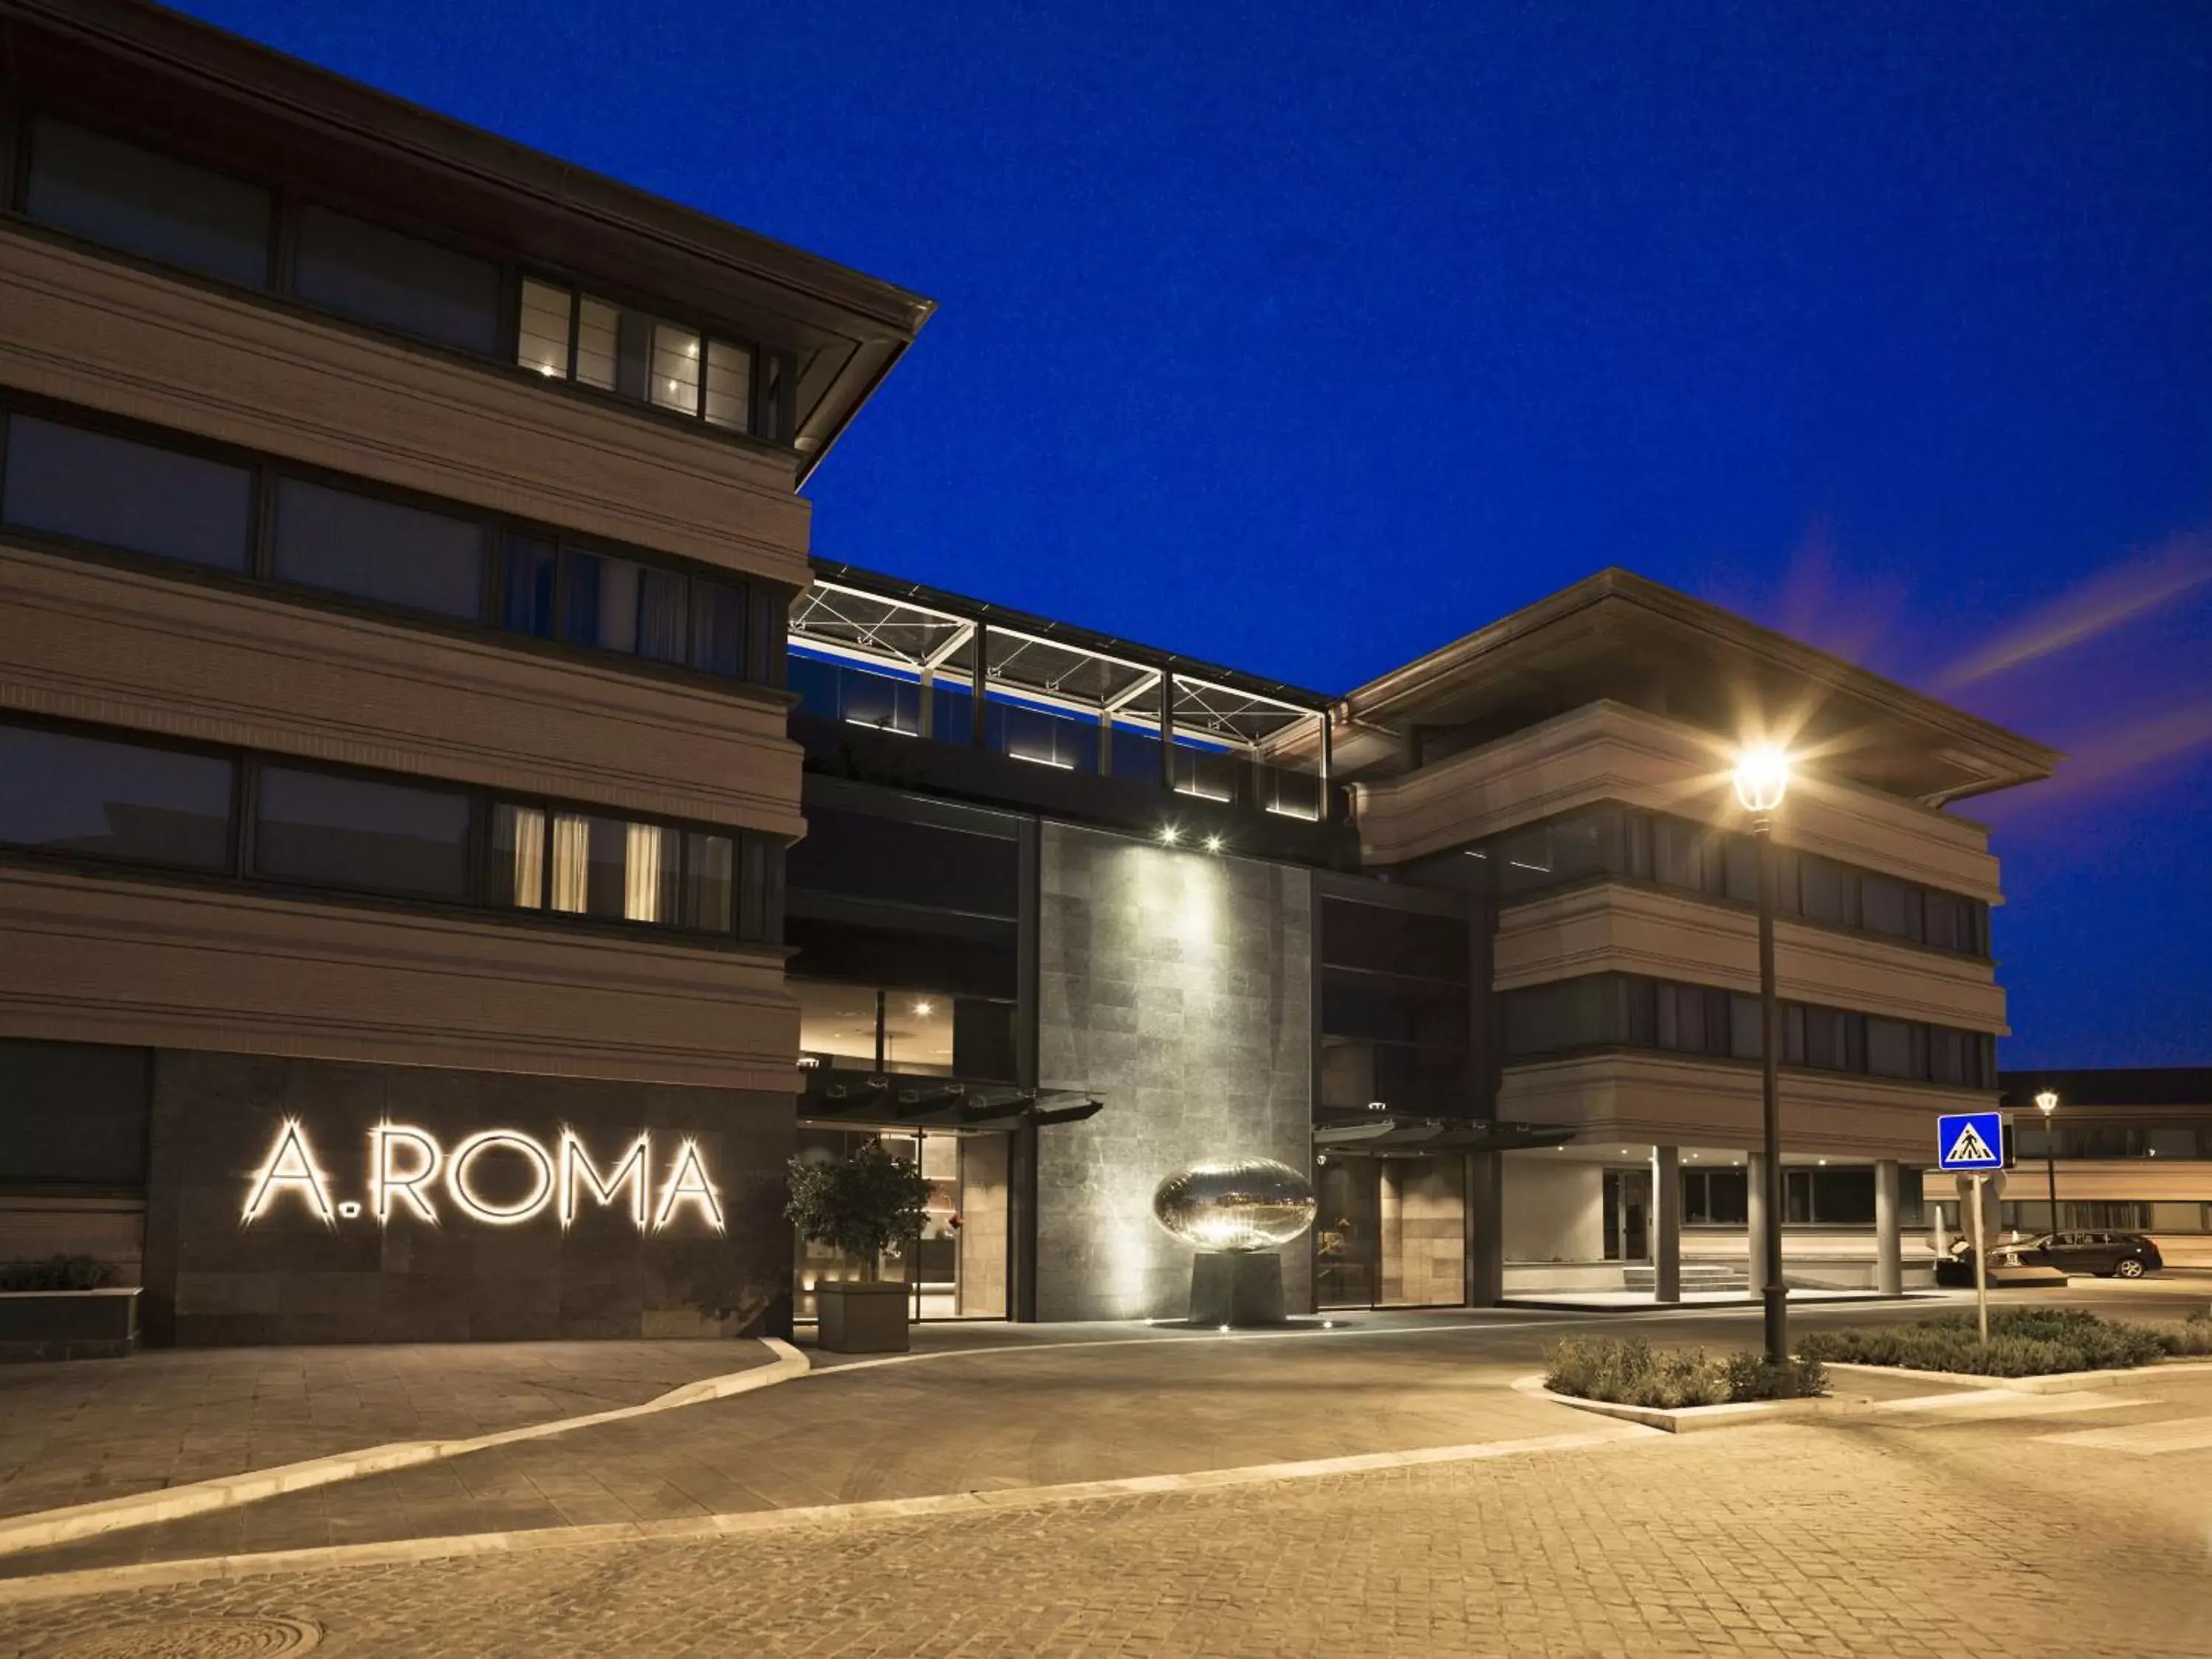 Property Building in A.Roma Lifestyle Hotel